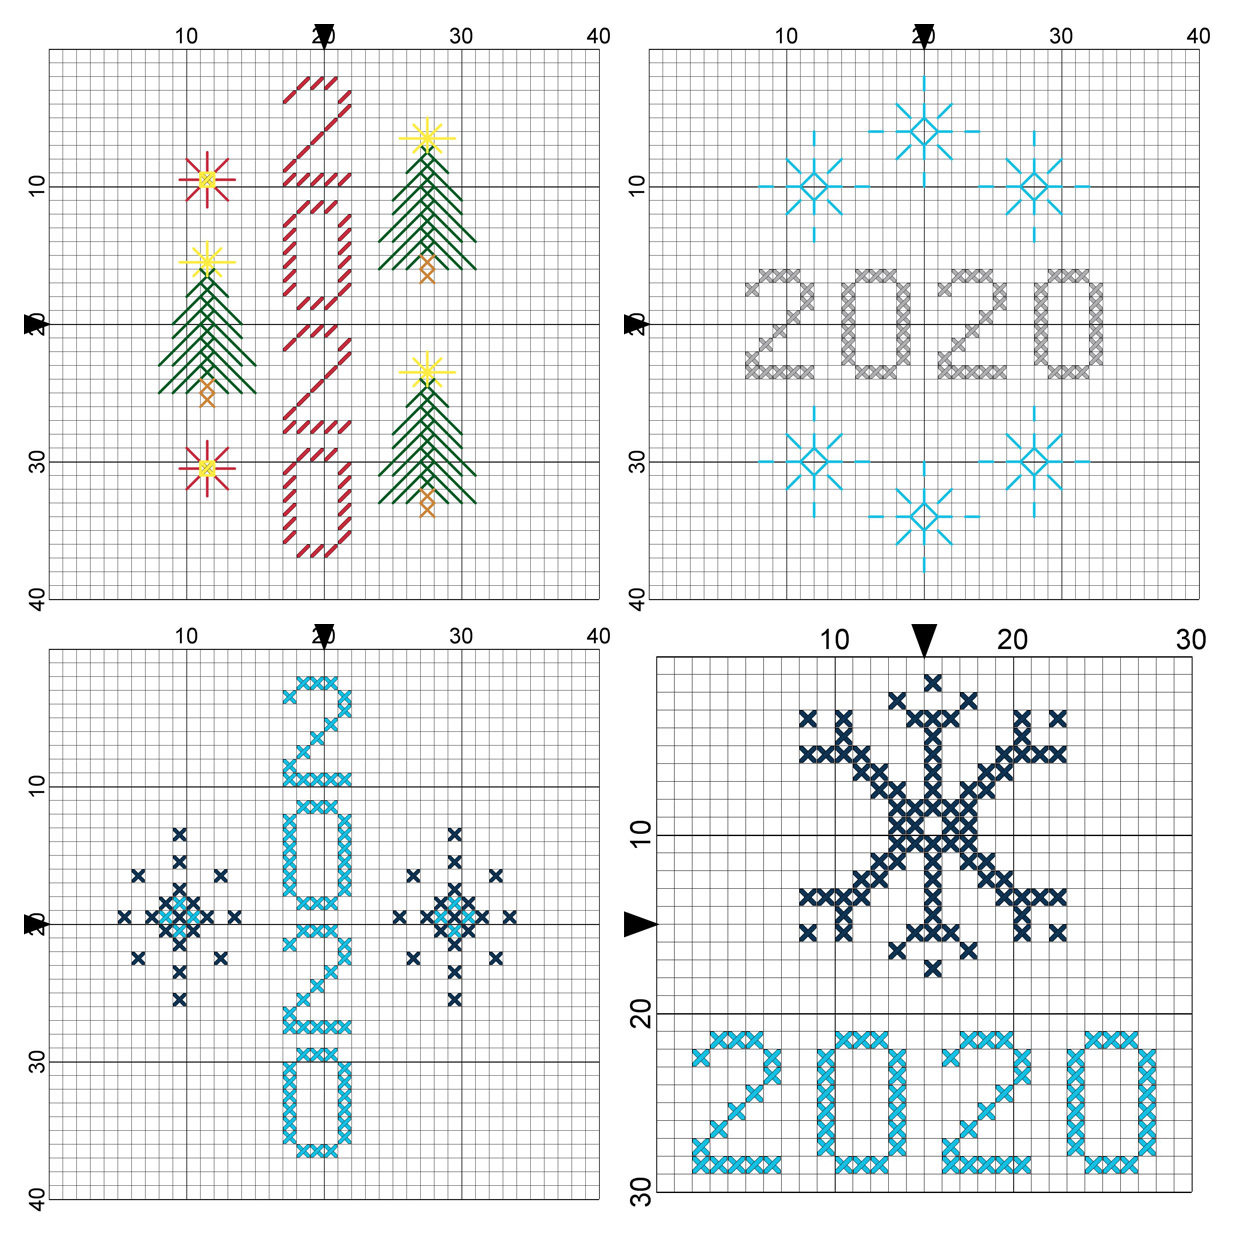 A Stitch in Time - 2020 Embroidery Journal Deepdive